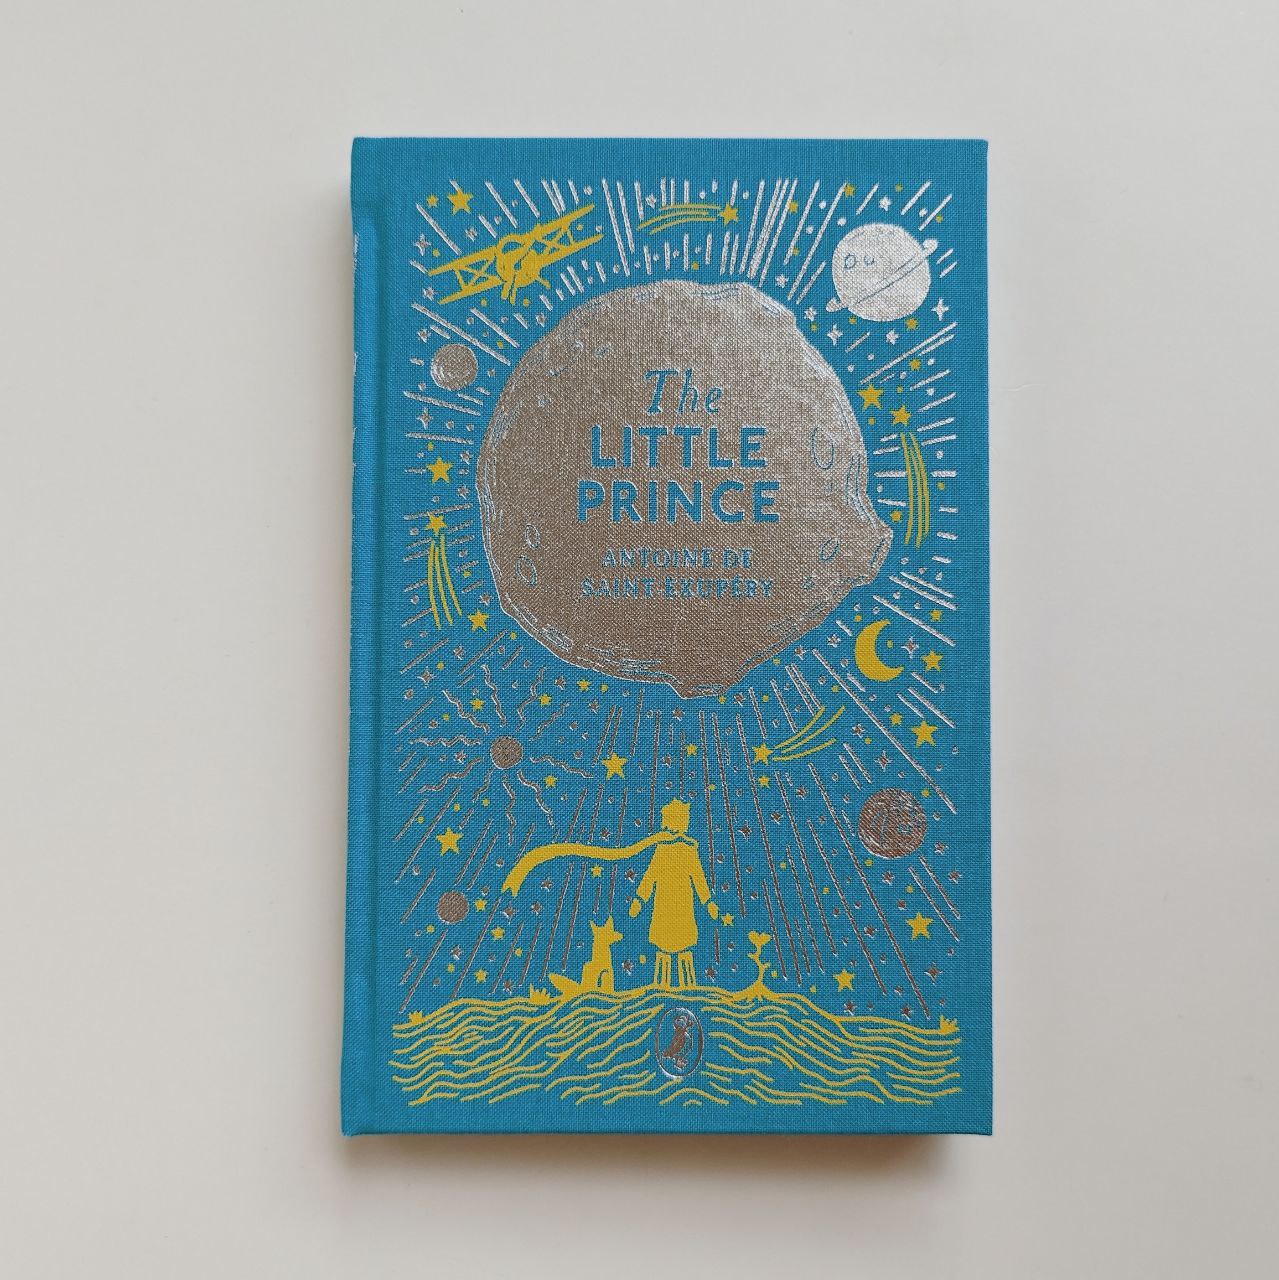 The Little Prince (Paperback)